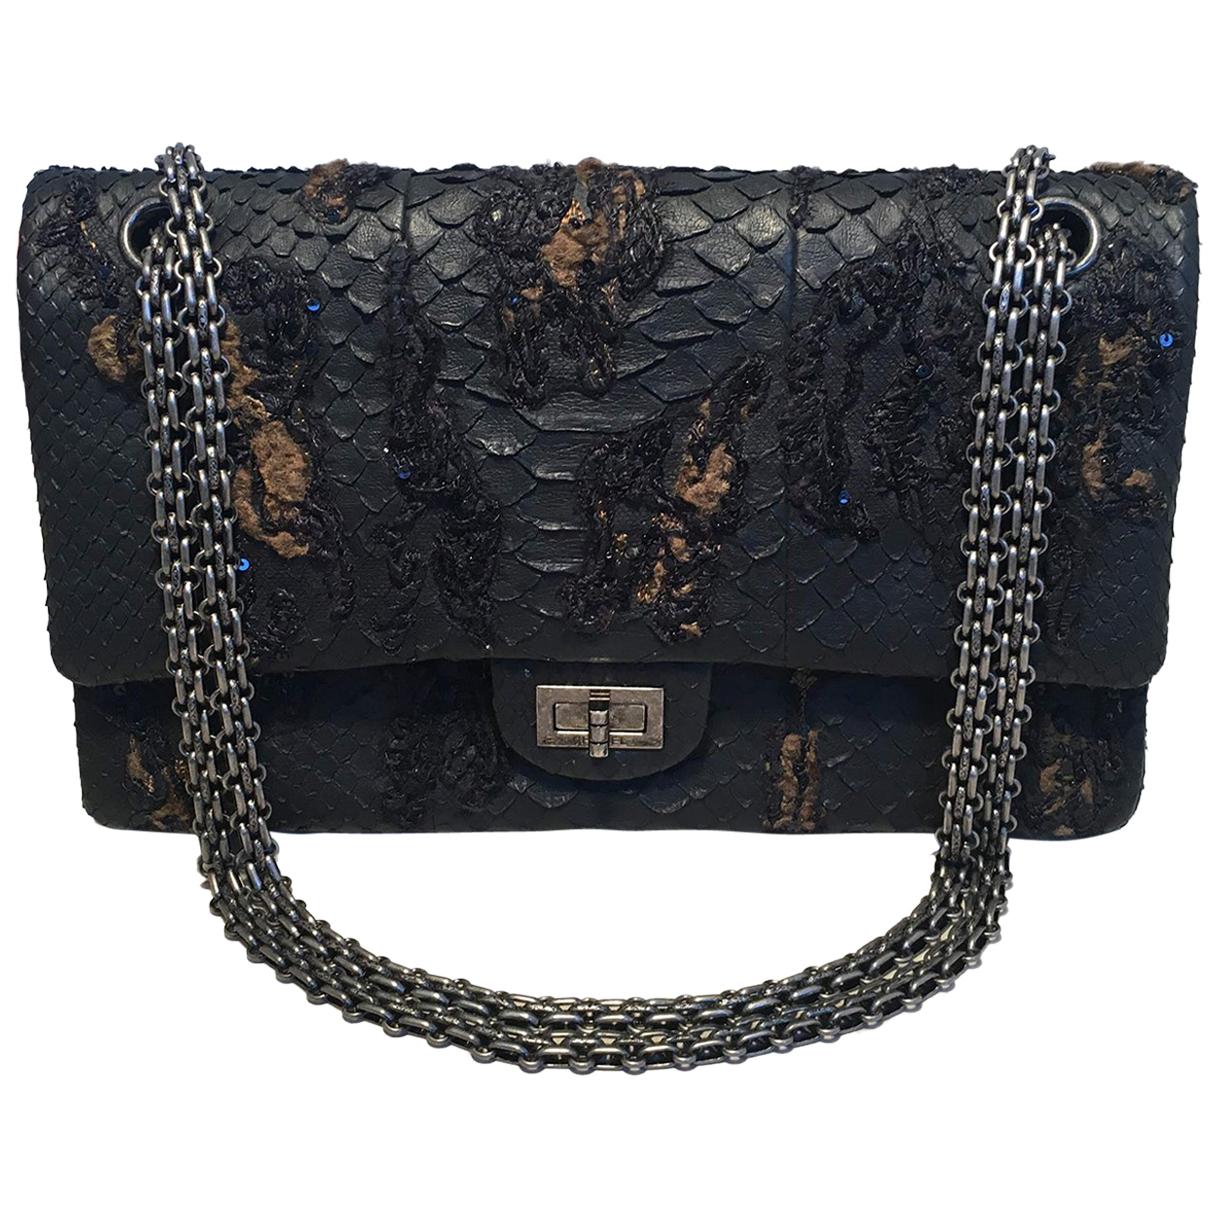 RARE Chanel Black Embroidered Python 2.55 Classic Flap Reissue 226